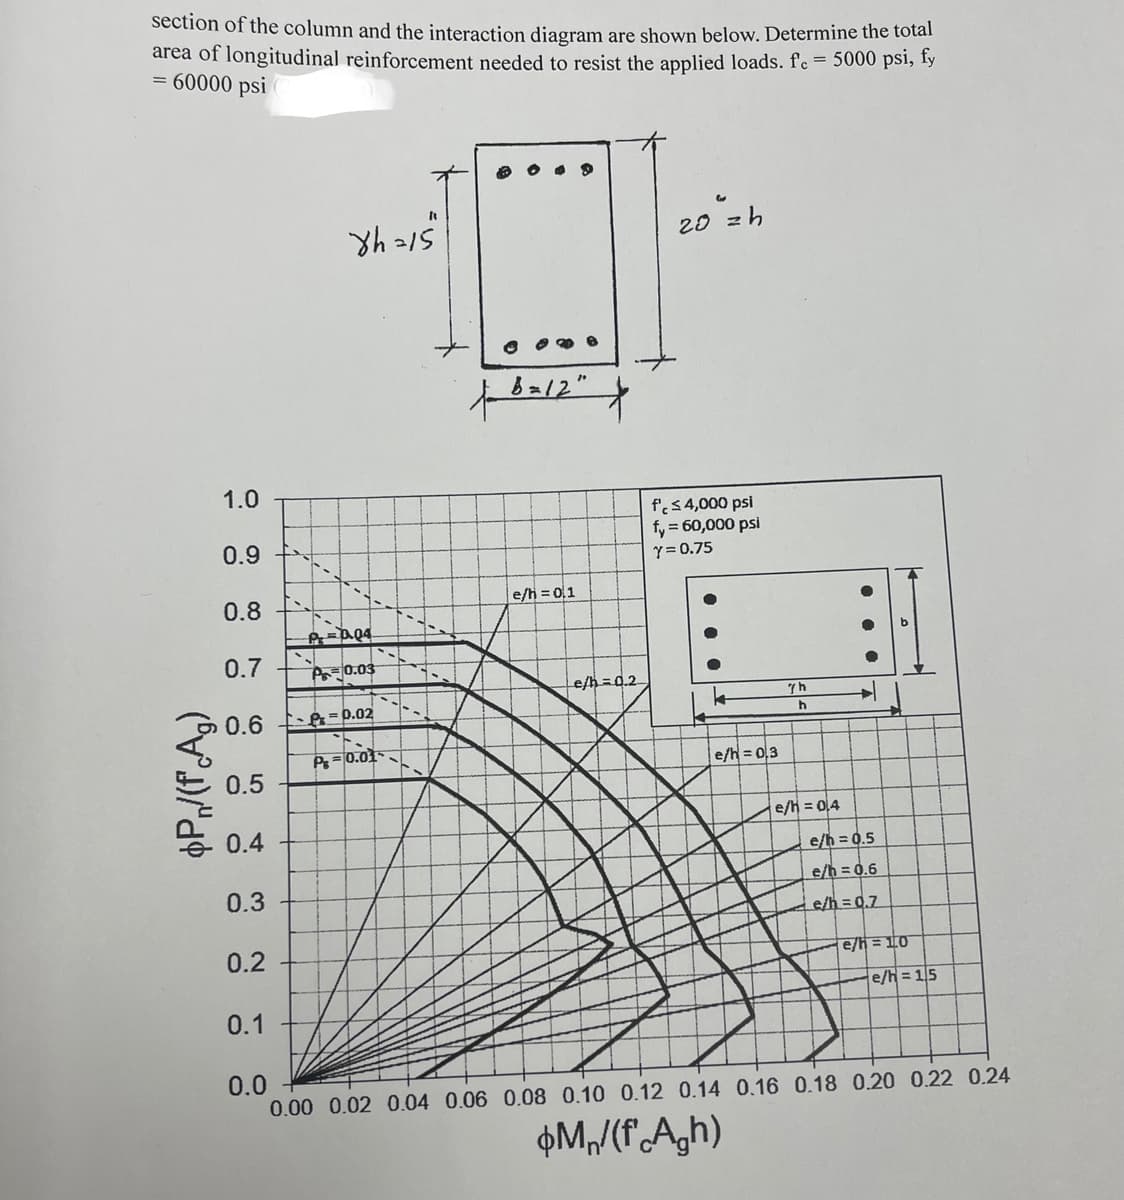 section of the column and the interaction diagram are shown below. Determine the total
area of longitudinal reinforcement needed to resist the applied loads. fc = 5000 psi, Iy
= 60000 psi
20 zh
b=12"
1.0
f'.s4,000 psi
fy = 60,000 psi
Y = 0.75
0.9
0.8
e/h = 0,1
0.7
Pa0.03
Le/h=0.2
0.6
=0.02
Ps=0.01
e/h = 0,3
0.5
e/h = 0,4
0.4
e/h =0.5
0.3
e/h = 0.6
Le/h=0.7
0.2
e/h = 10
e/h= 15
0.1
0.0
0.00 0.02 0.04 0.06 0.08 0.10 0.12 0.14 0.16 0.18 0.20 0.22 0.24
M,/(f'Agh)
